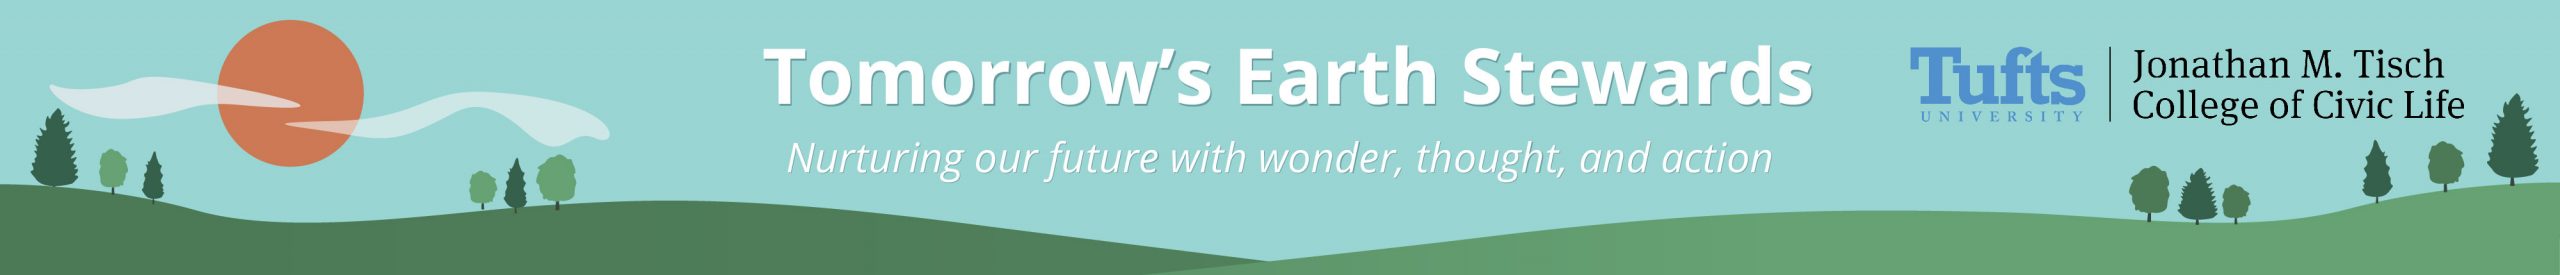 Tomorrow's Earth Stewards: Nurturing Our Future with wonder, thought and action 